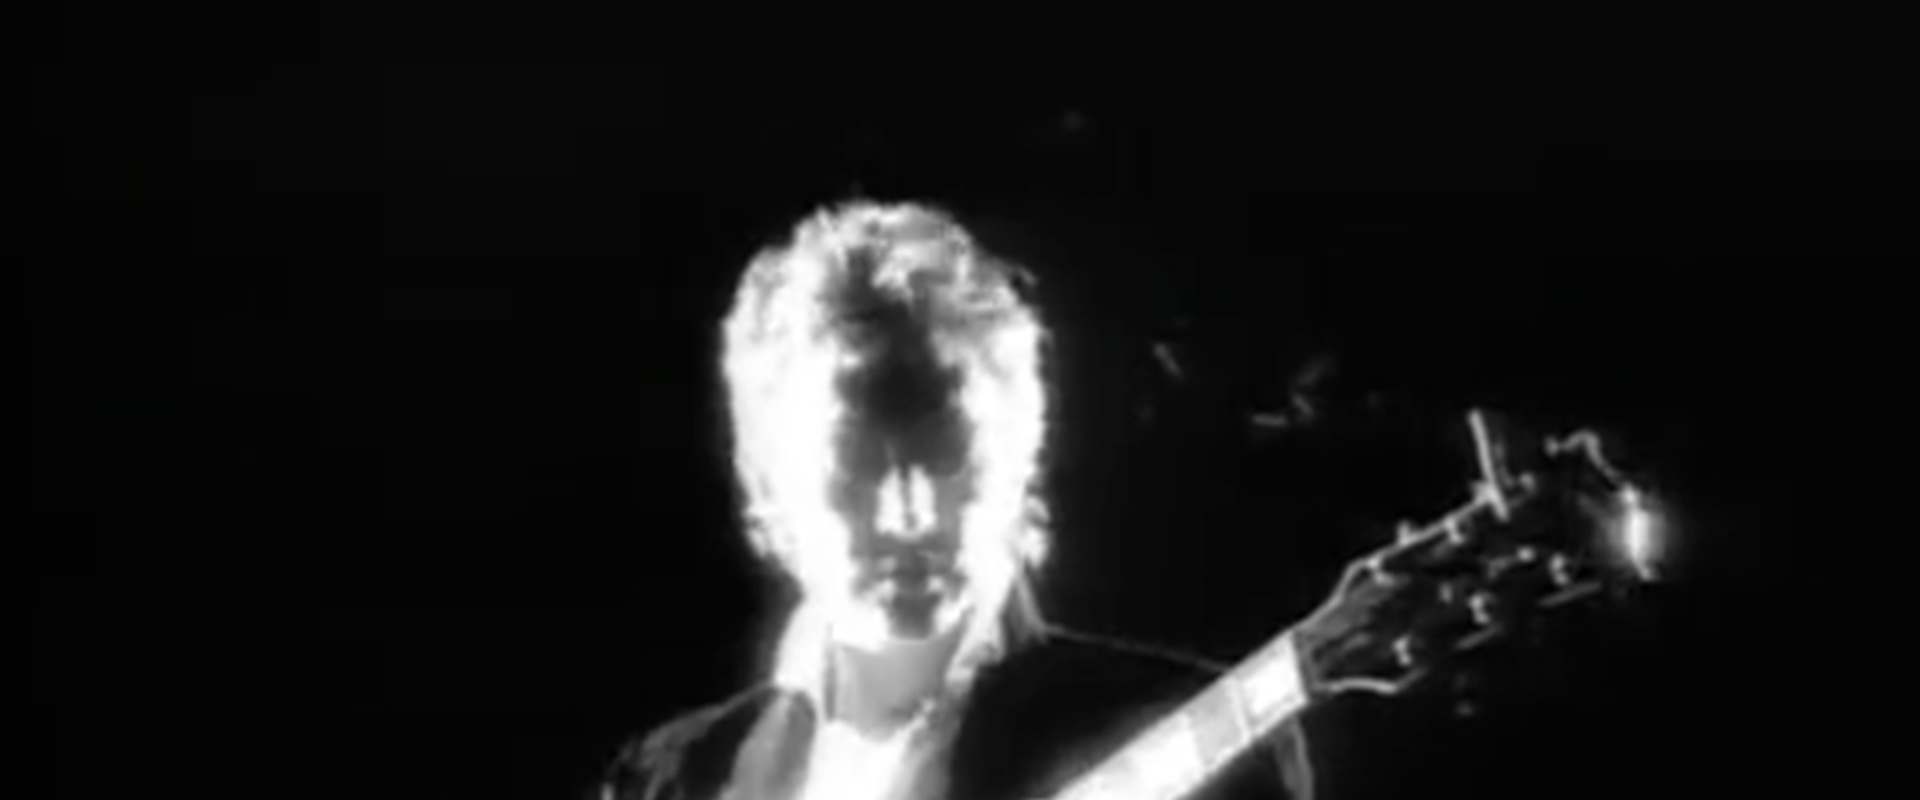 The Police - Every Breath You Take background 1